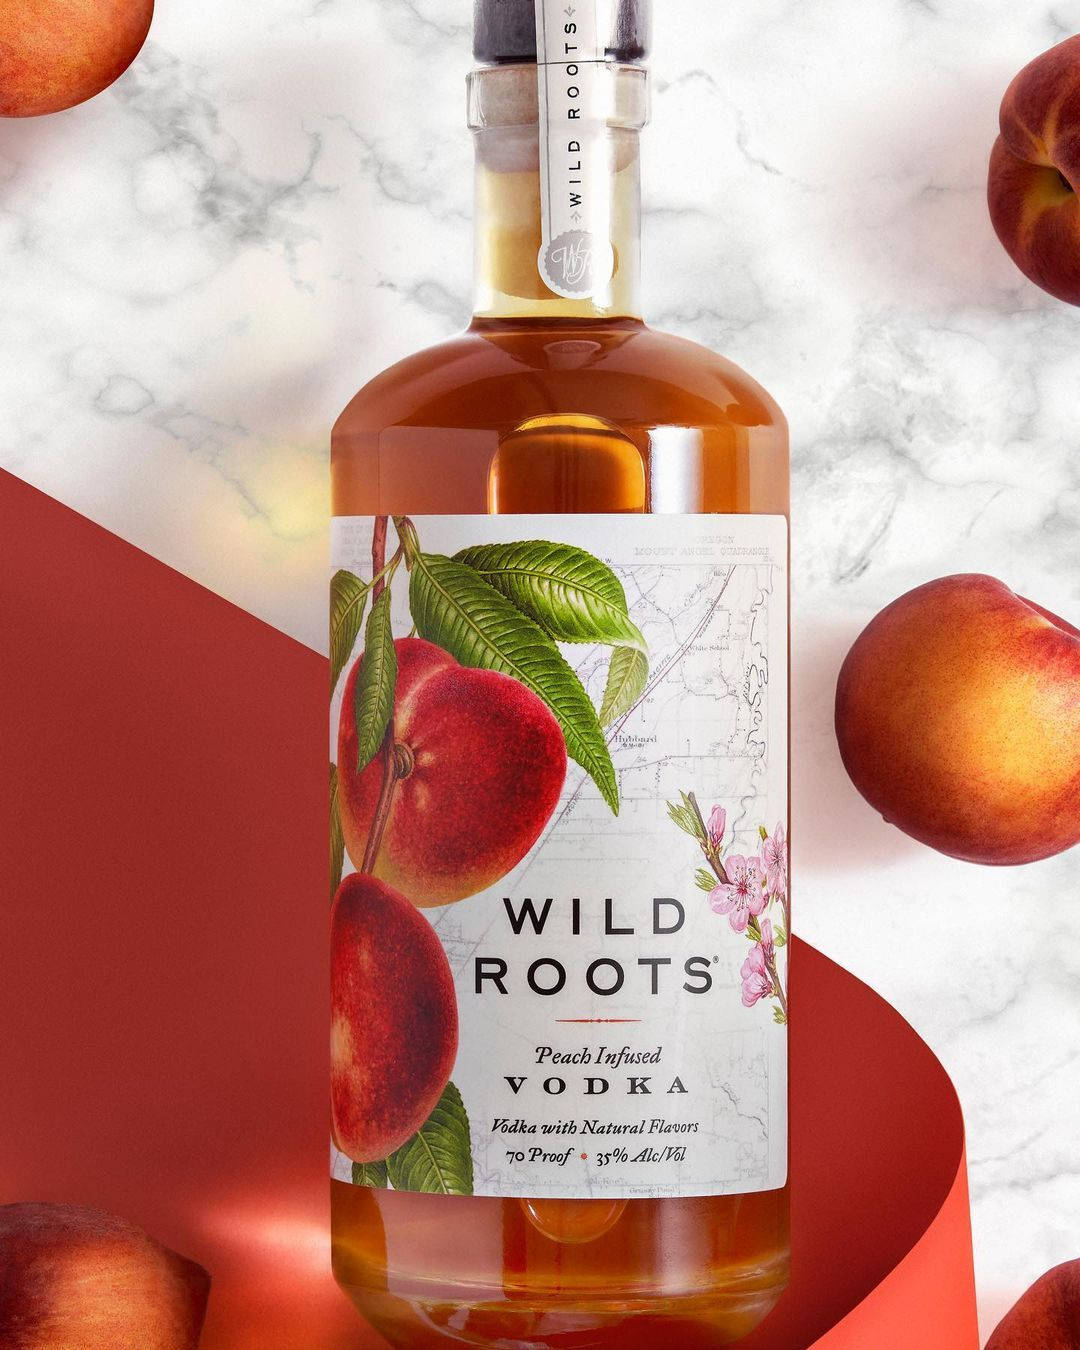 Wild Roots' Huckleberry-Infused Vodka Bottle Showcasing Natural Ingredients Wallpaper